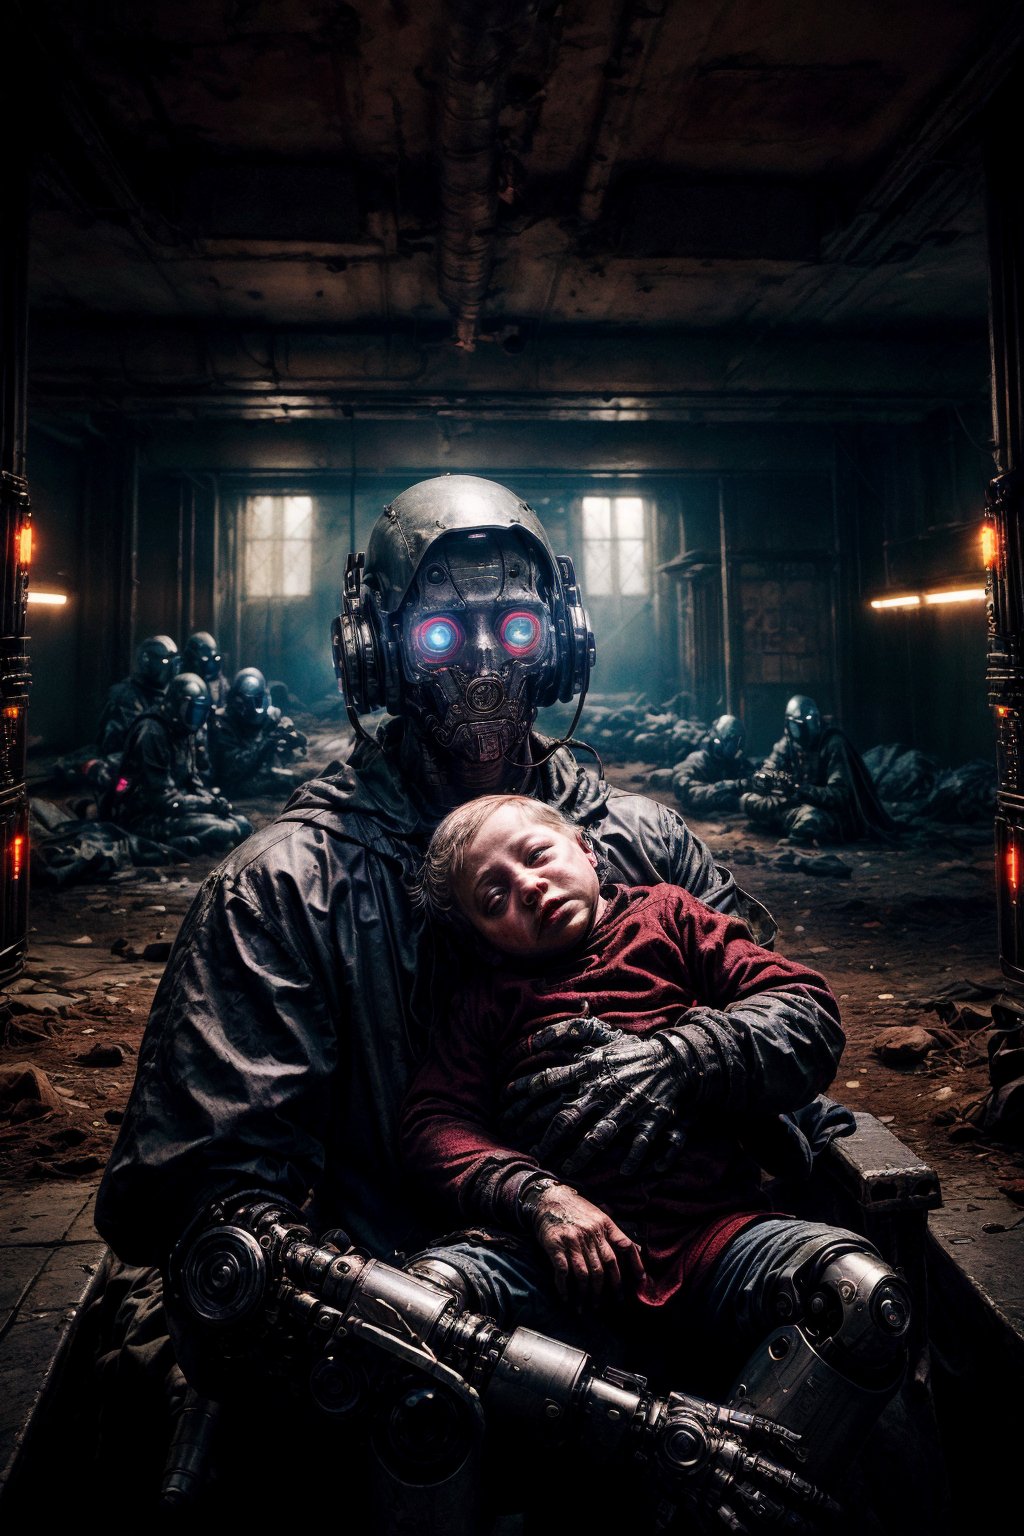 (((very old grandfather with cybernetic implants on his body and hands holds a baby over his head))), ((Around them sit mechanized robotic embryos with glowing eyes)), ((dystopian cyberpunk laboratory for growing children in futuristic capsules background)), ((lighting dust particles)), horror movie scene, best quality, masterpiece, (photorealistic:1.4), 8k uhd, dslr, masterpiece photoshoot, (in the style of Hans Heysen and Carne Griffiths),shot on Canon EOS 5D Mark IV DSLR, 85mm lens, long exposure time, f/8, ISO 100, shutter speed 1/125, award winning photograph, facing camera, perfect contrast,zavy-cbrpnk,cinematic style